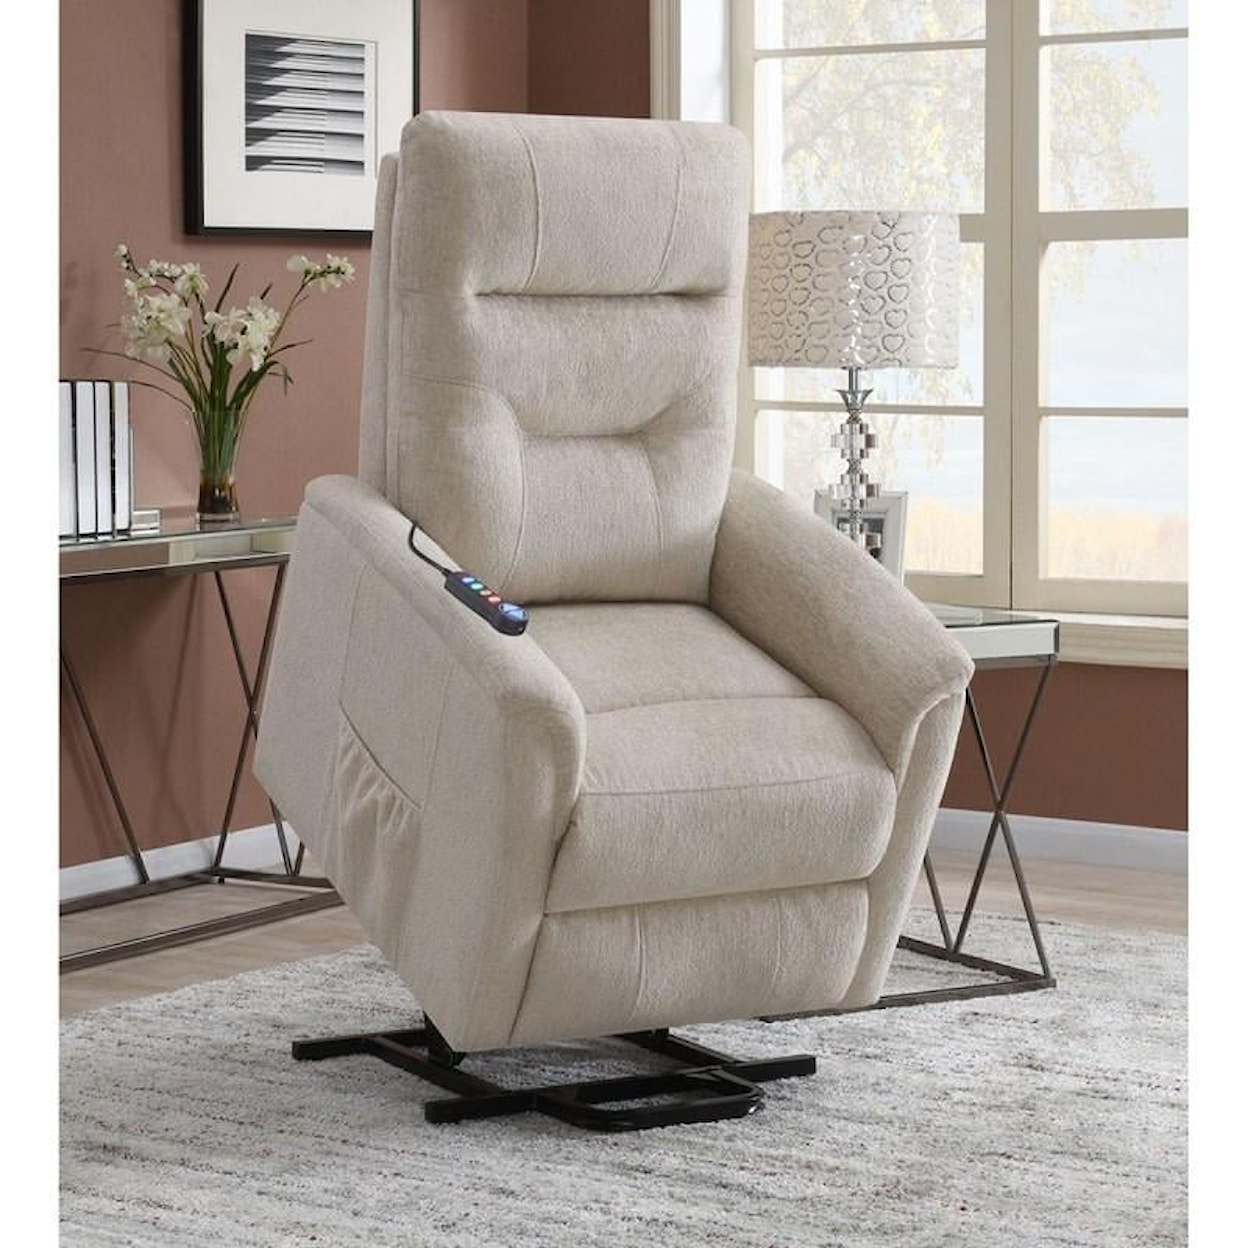 Coaster Power Lift Chair BEIGE POWER LIFT CHAIR WITH HEAT | AND MESSA